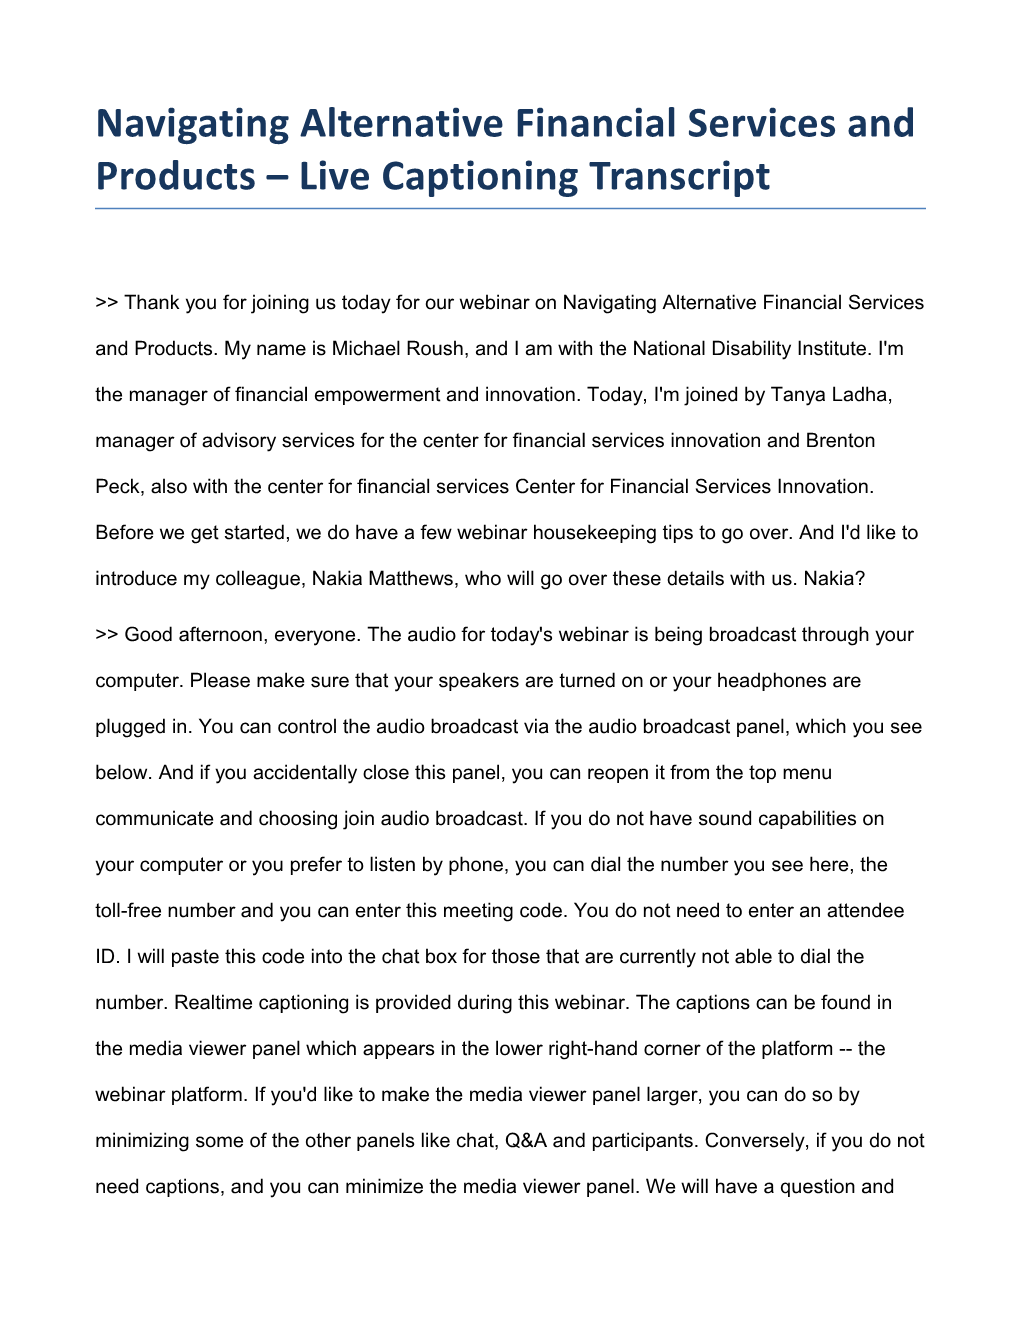 Navigating Alternative Financial Services and Products Live Captioning Transcript